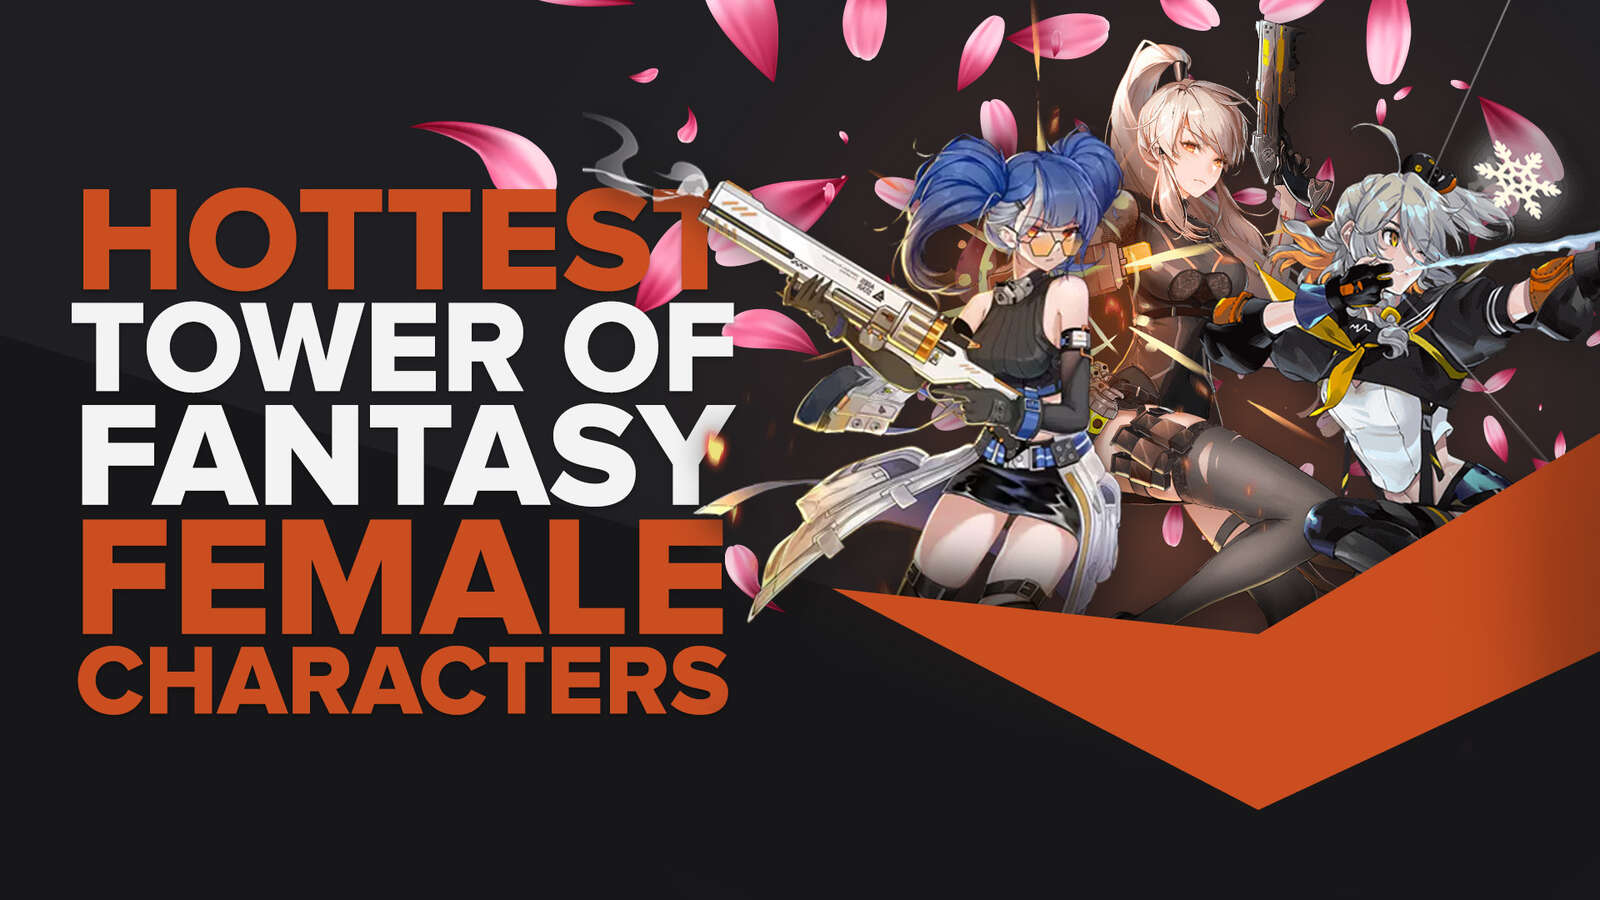 Hottest Female Characters in Tower of Fantasy